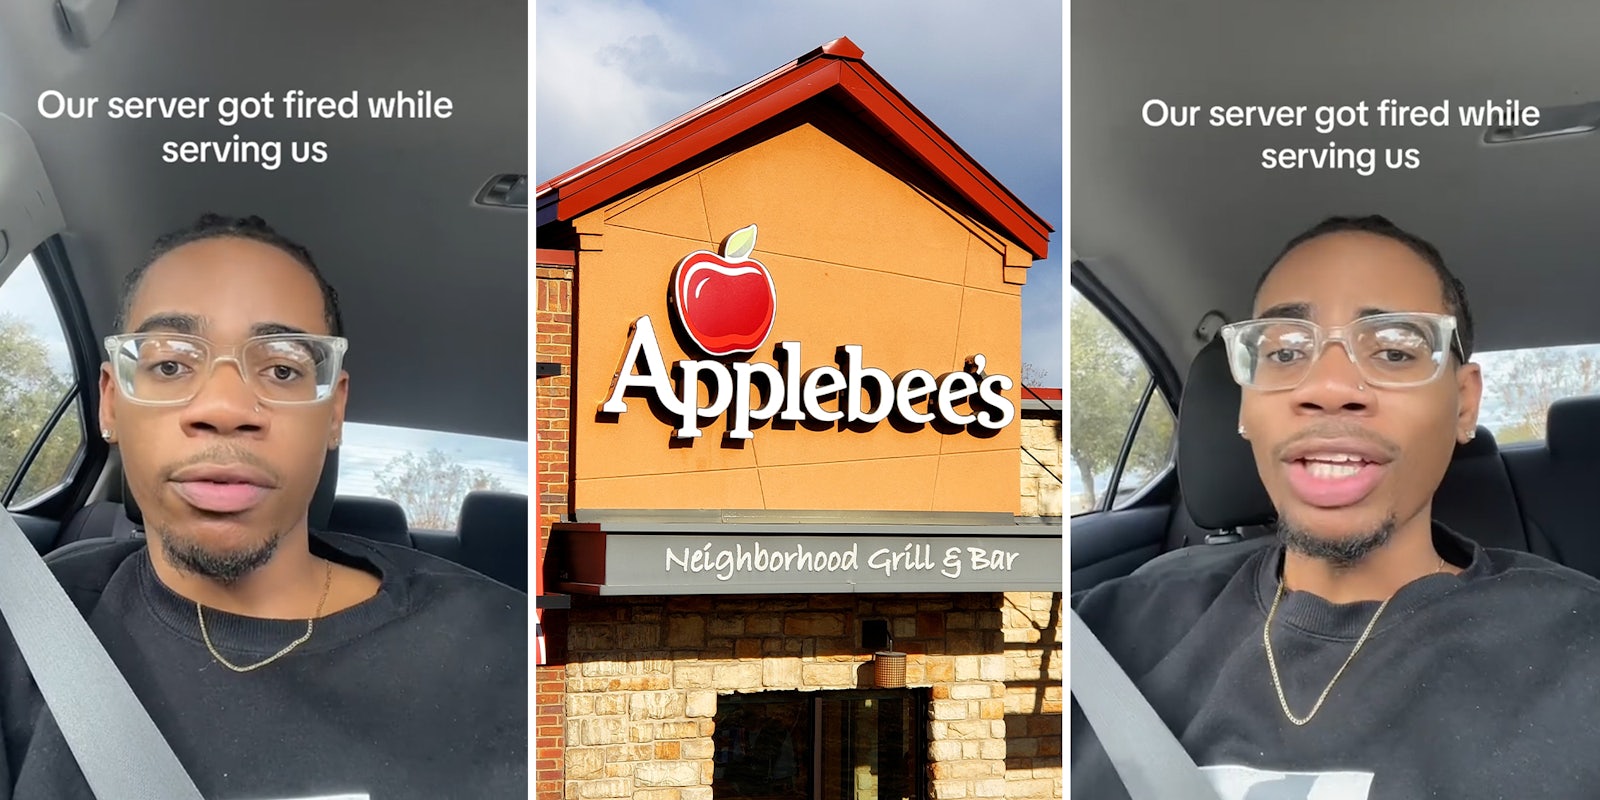 Applebee’s customer says worker got fired in the middle of serving them